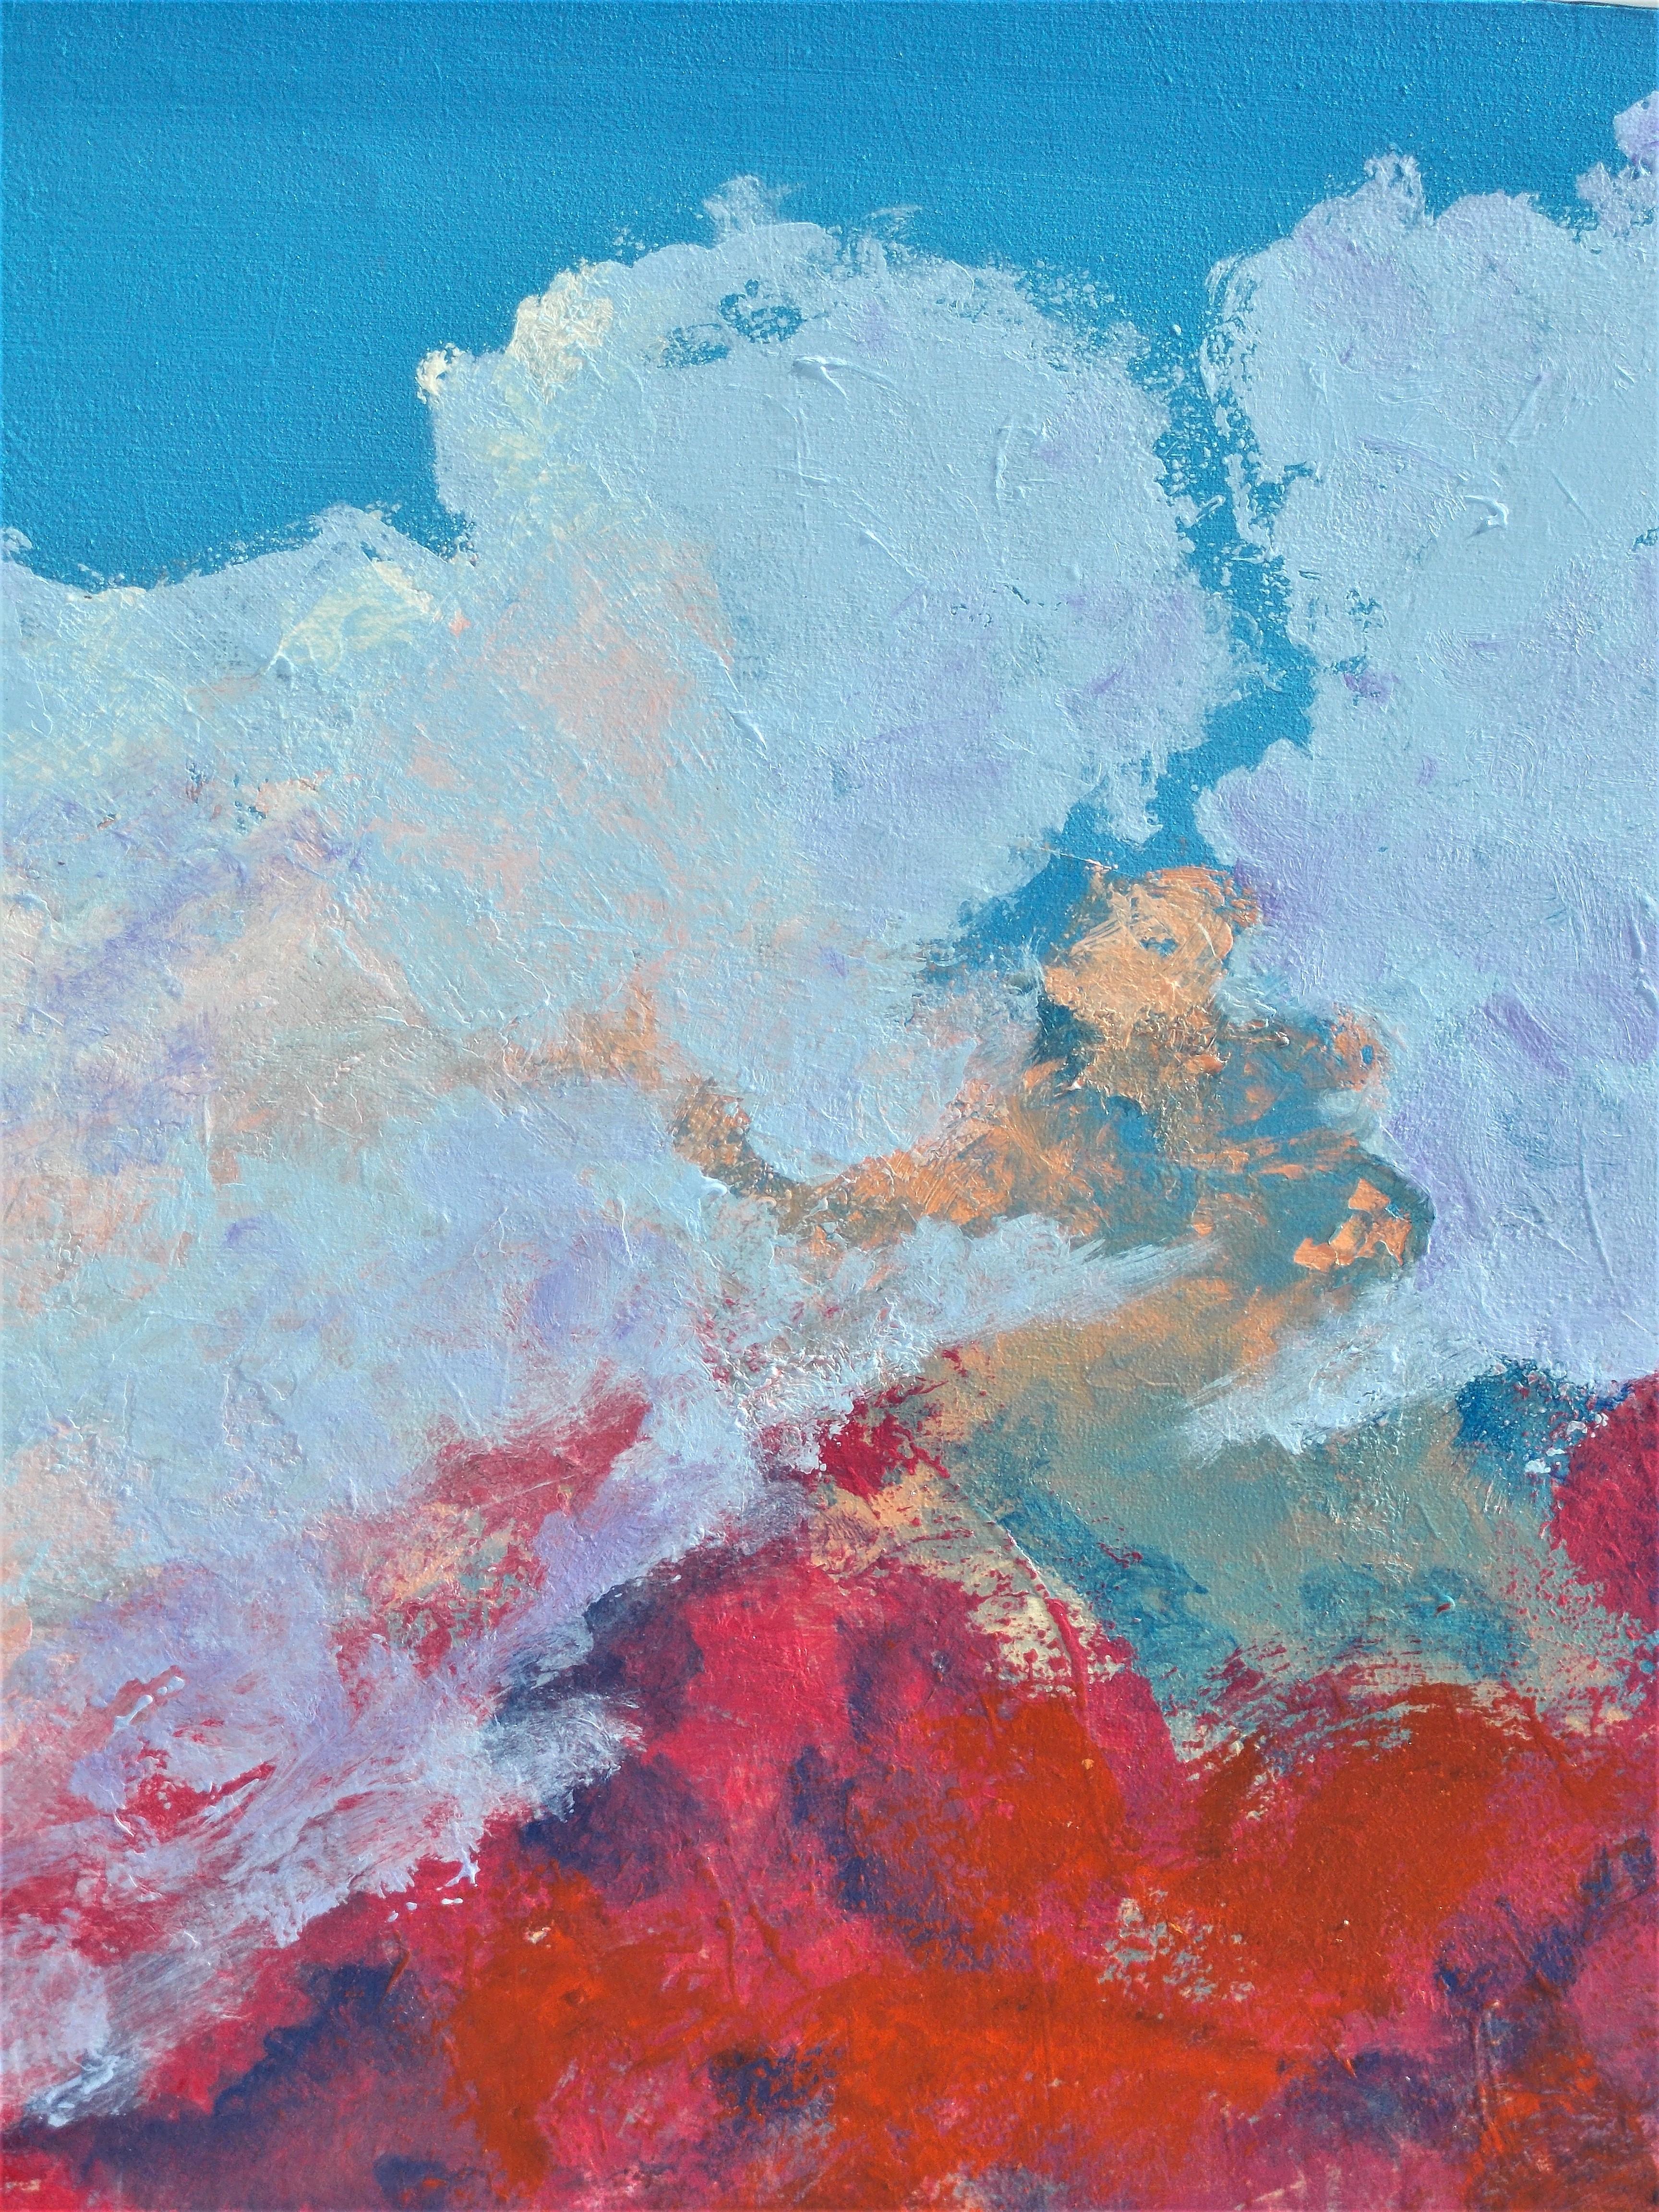 <p>Artist Comments<br />Looking up, artist Benjamin Thomas captured a glowing bank of clouds at sunset. Deep reds interspersed with peach and purple illustrate the dramatic evening sky. 